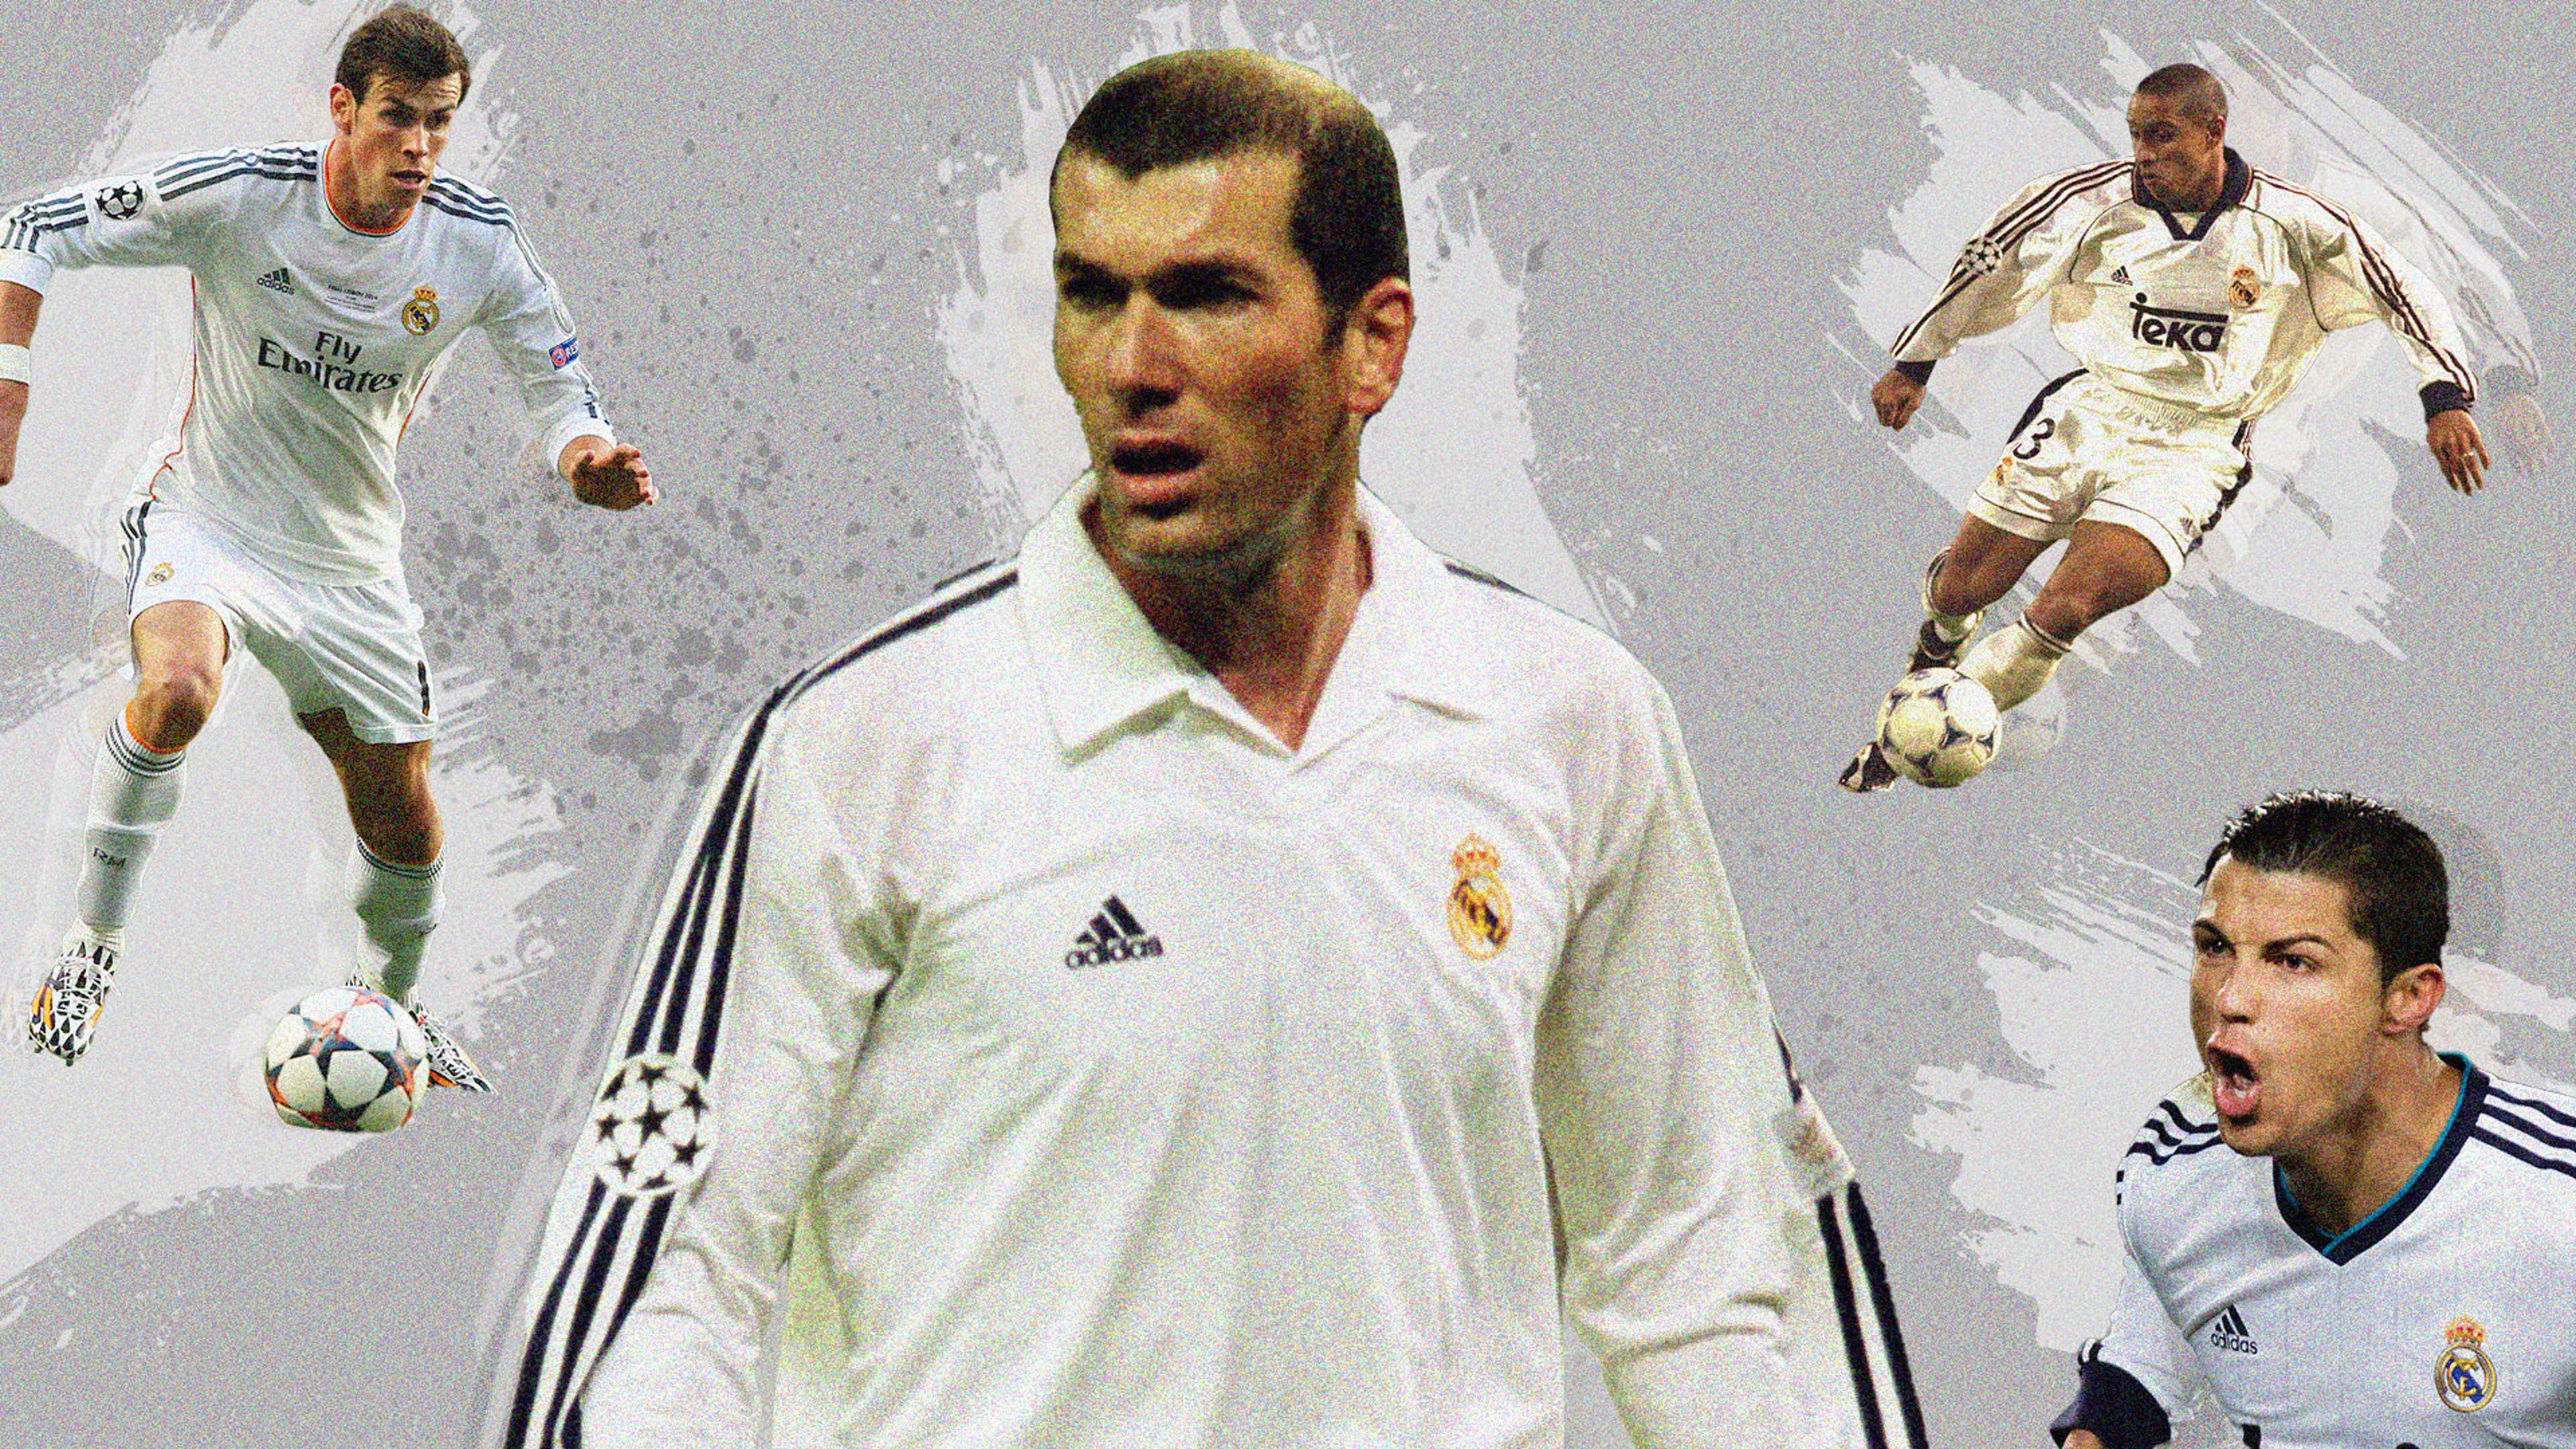 Evolution of Madrid's legendary number 7 through the years